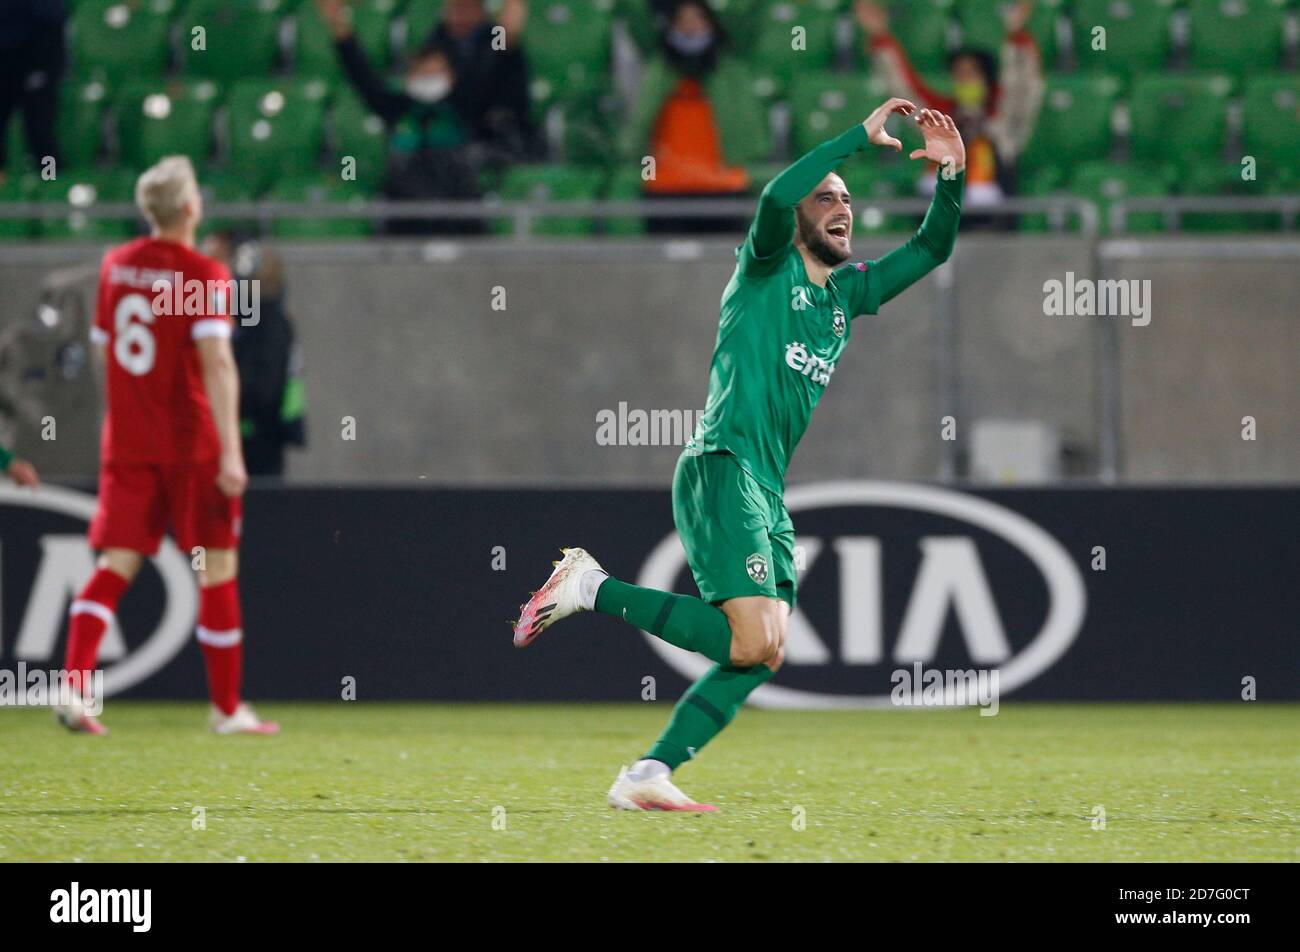 RAZGRAD, BULGARIA - OCTOBER 22: Higinio Marin of Ludogorets celebrates  after scoring his goal for 1-0 in 46th minute during the UEFA Europa League  Group J stage match between PFC Ludogorets Razgrad